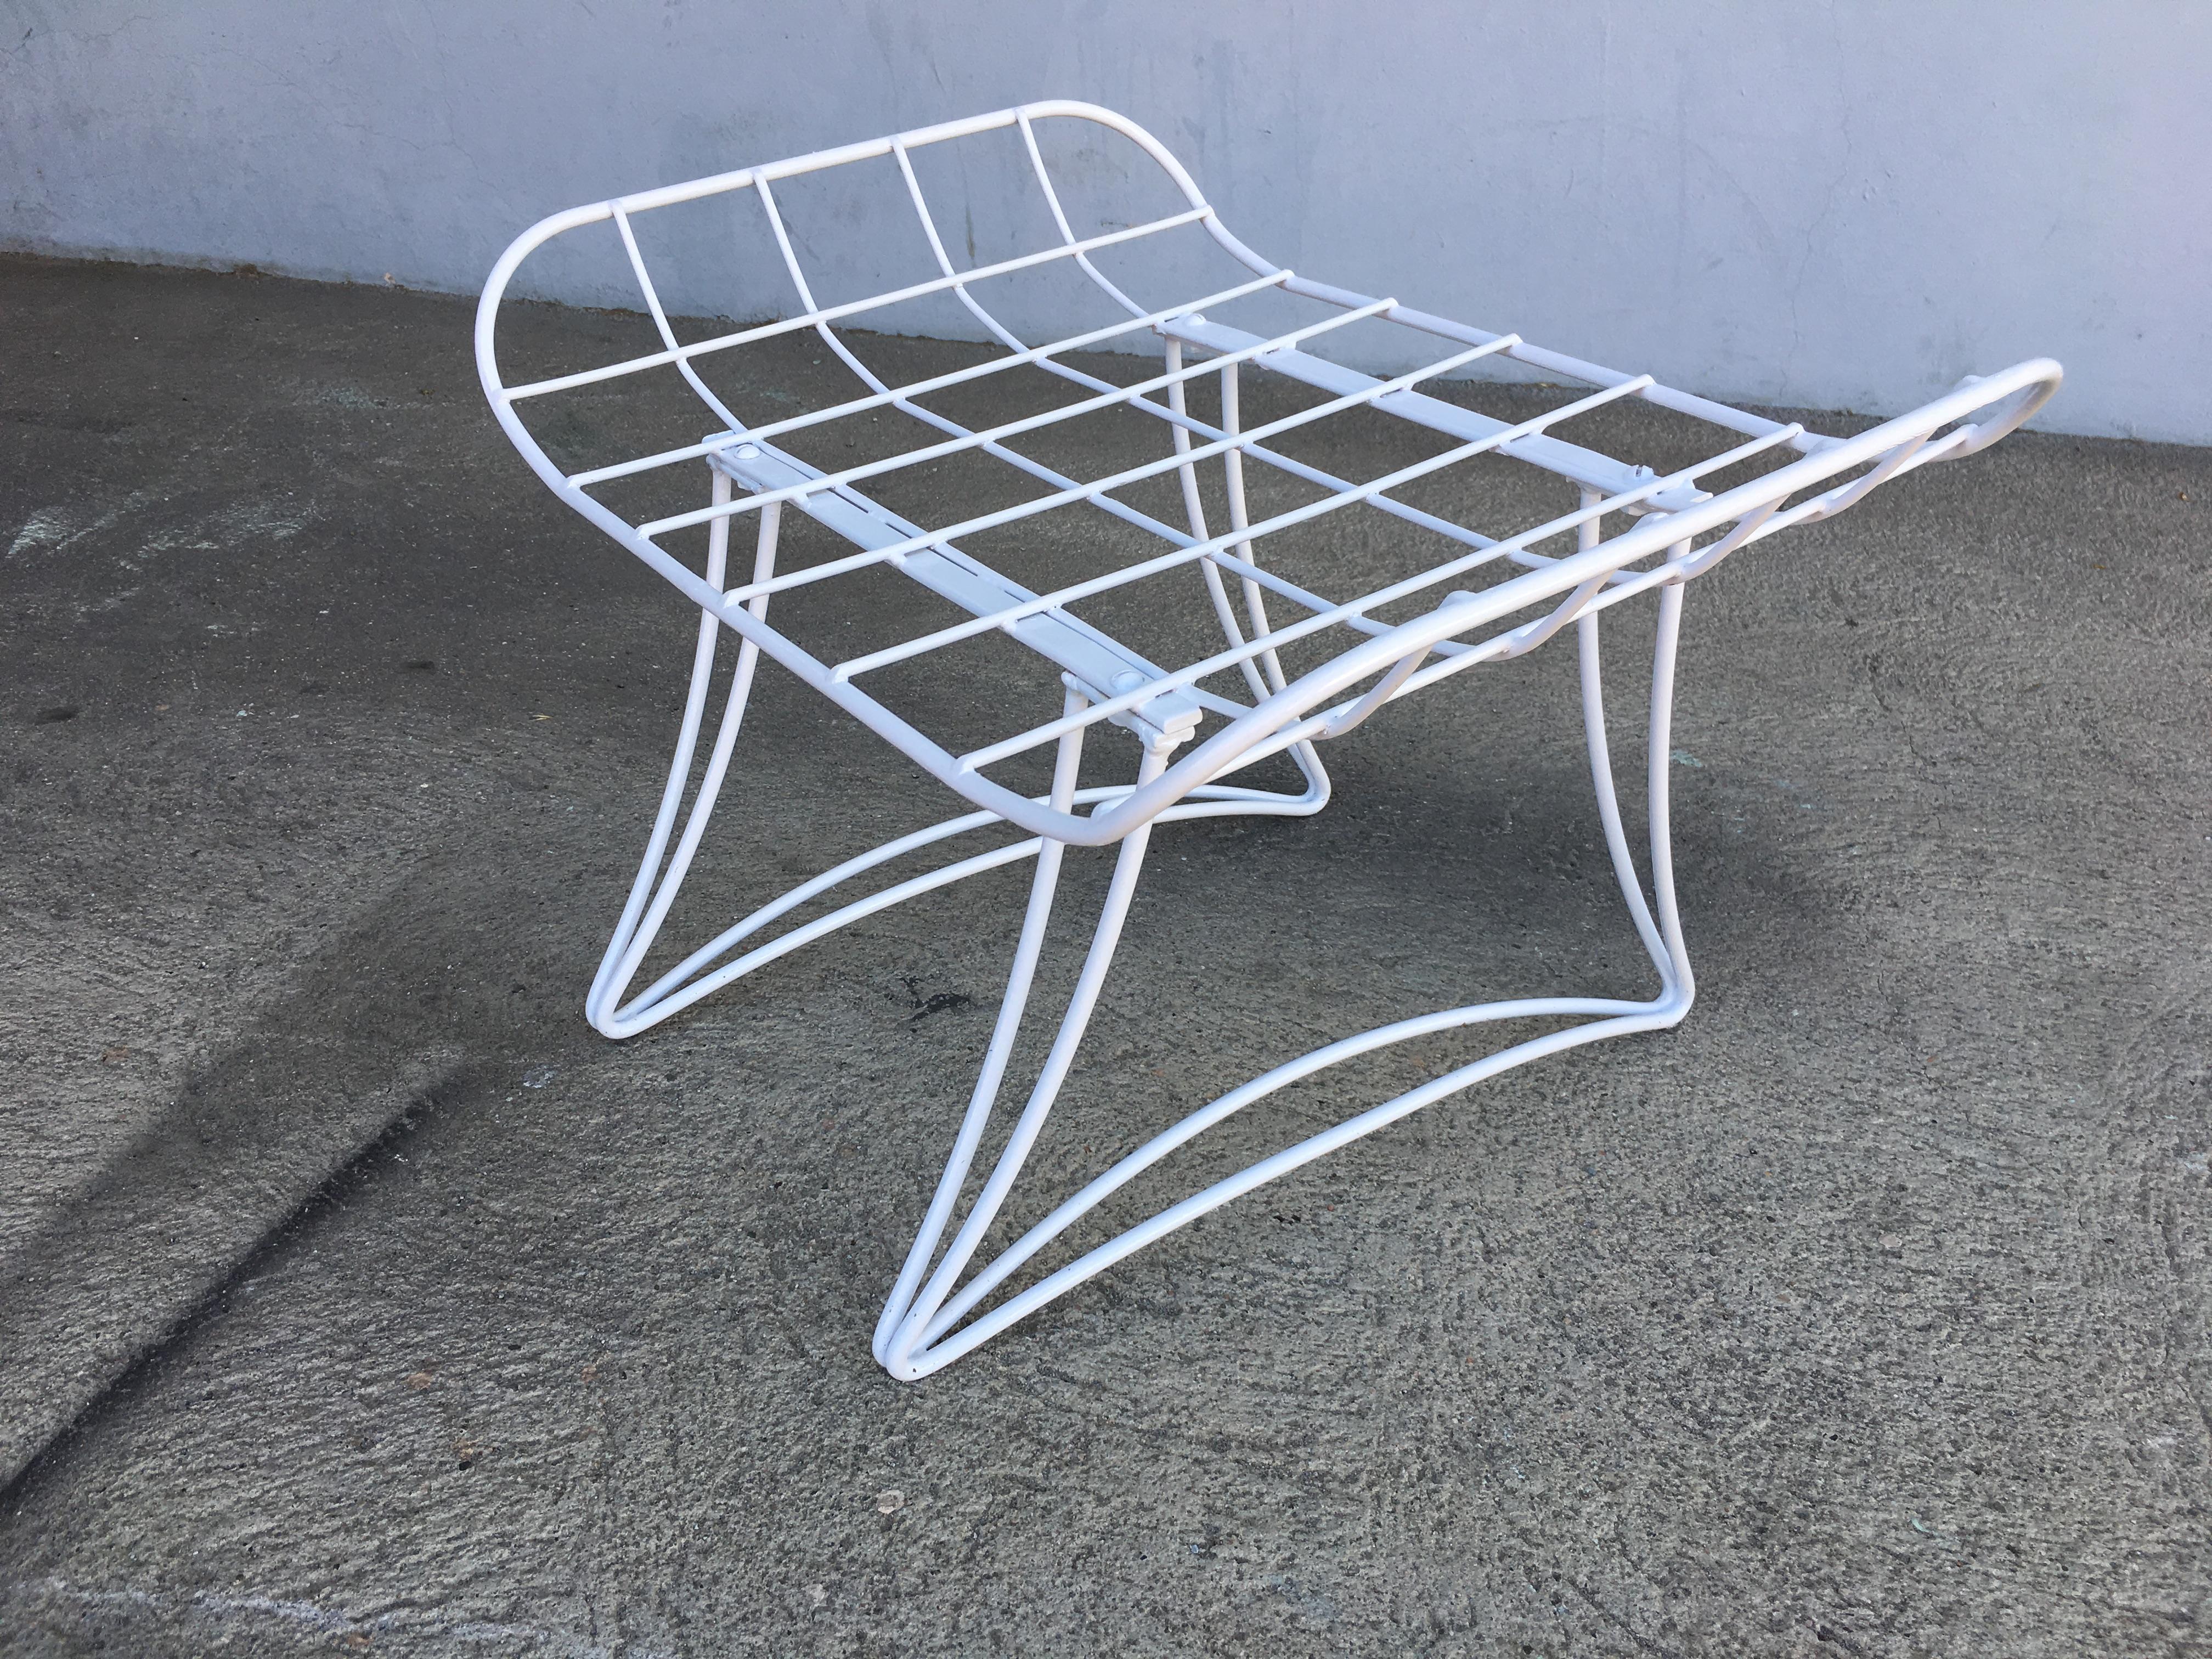 Midcentury wireframe ottoman by the Homecrest company.
 